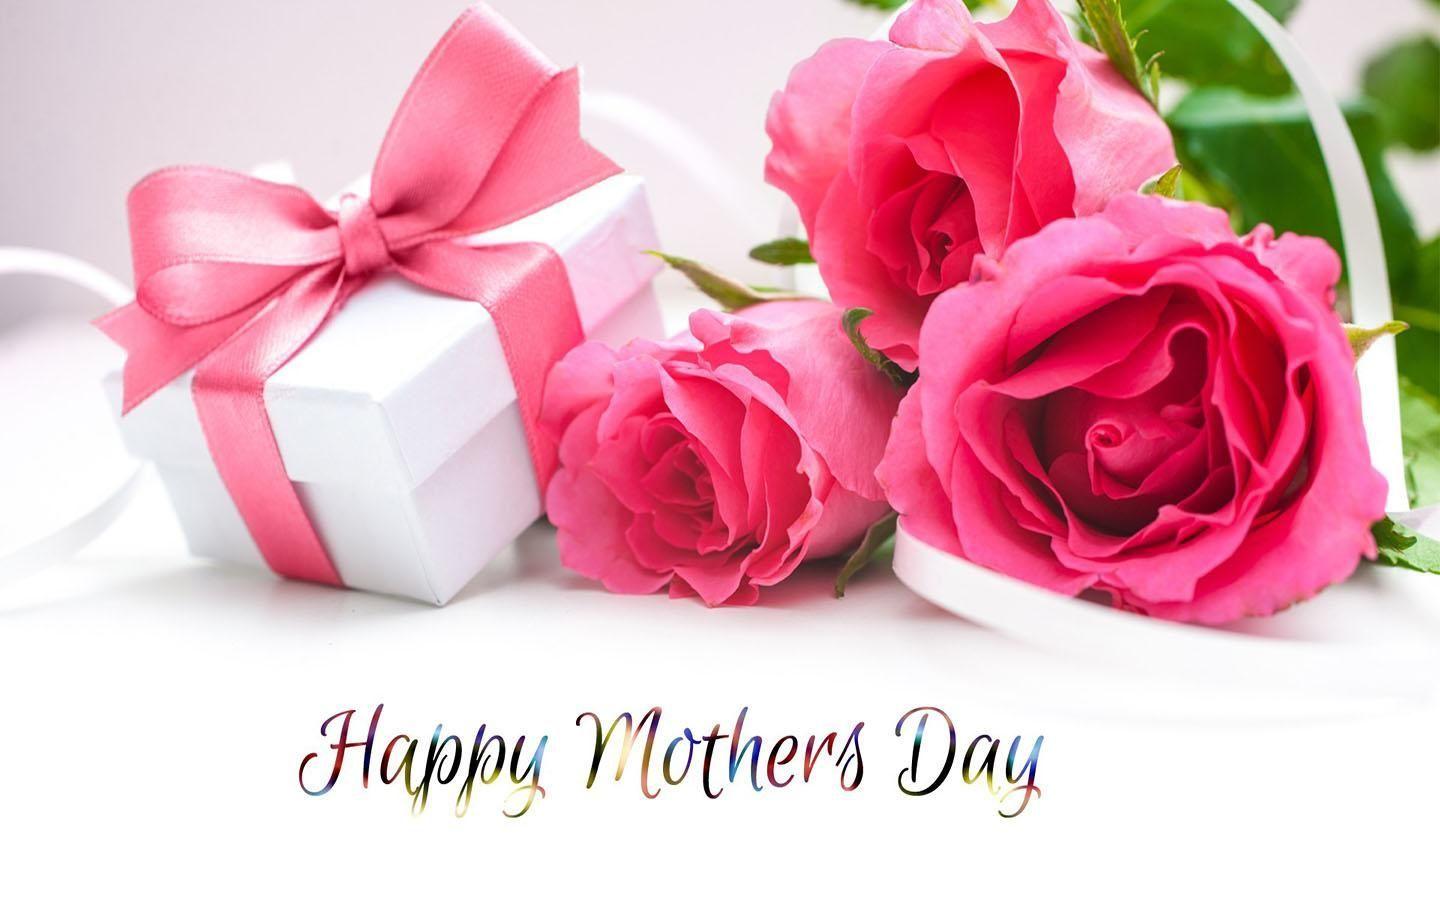 500+ Happy Mothers Day Images [HD] | Download Free Images on Unsplash